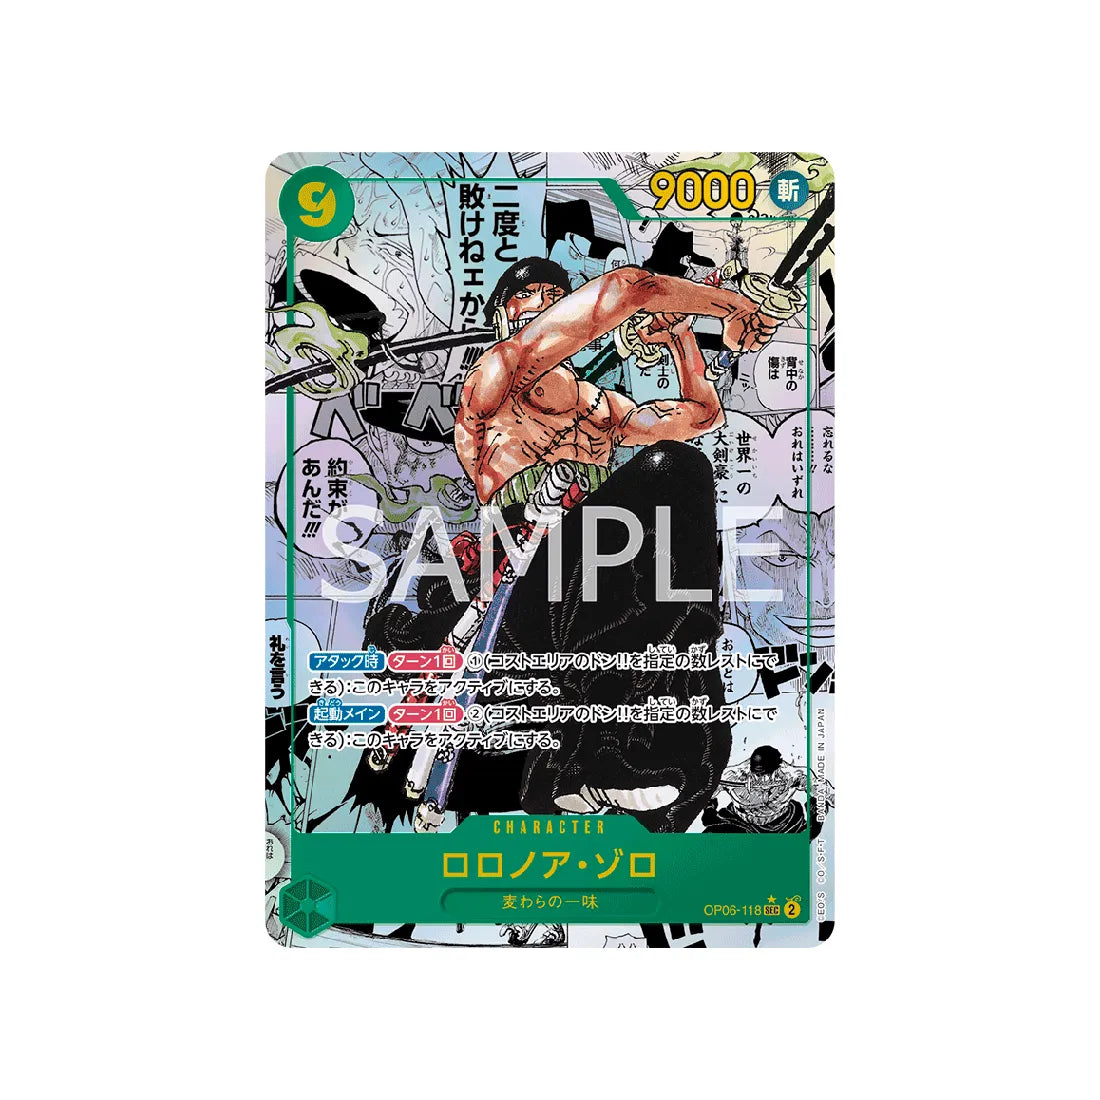 One Piece Wings Of Captain Card OP06-118: Roronoa Zoro (Special Parallel) 